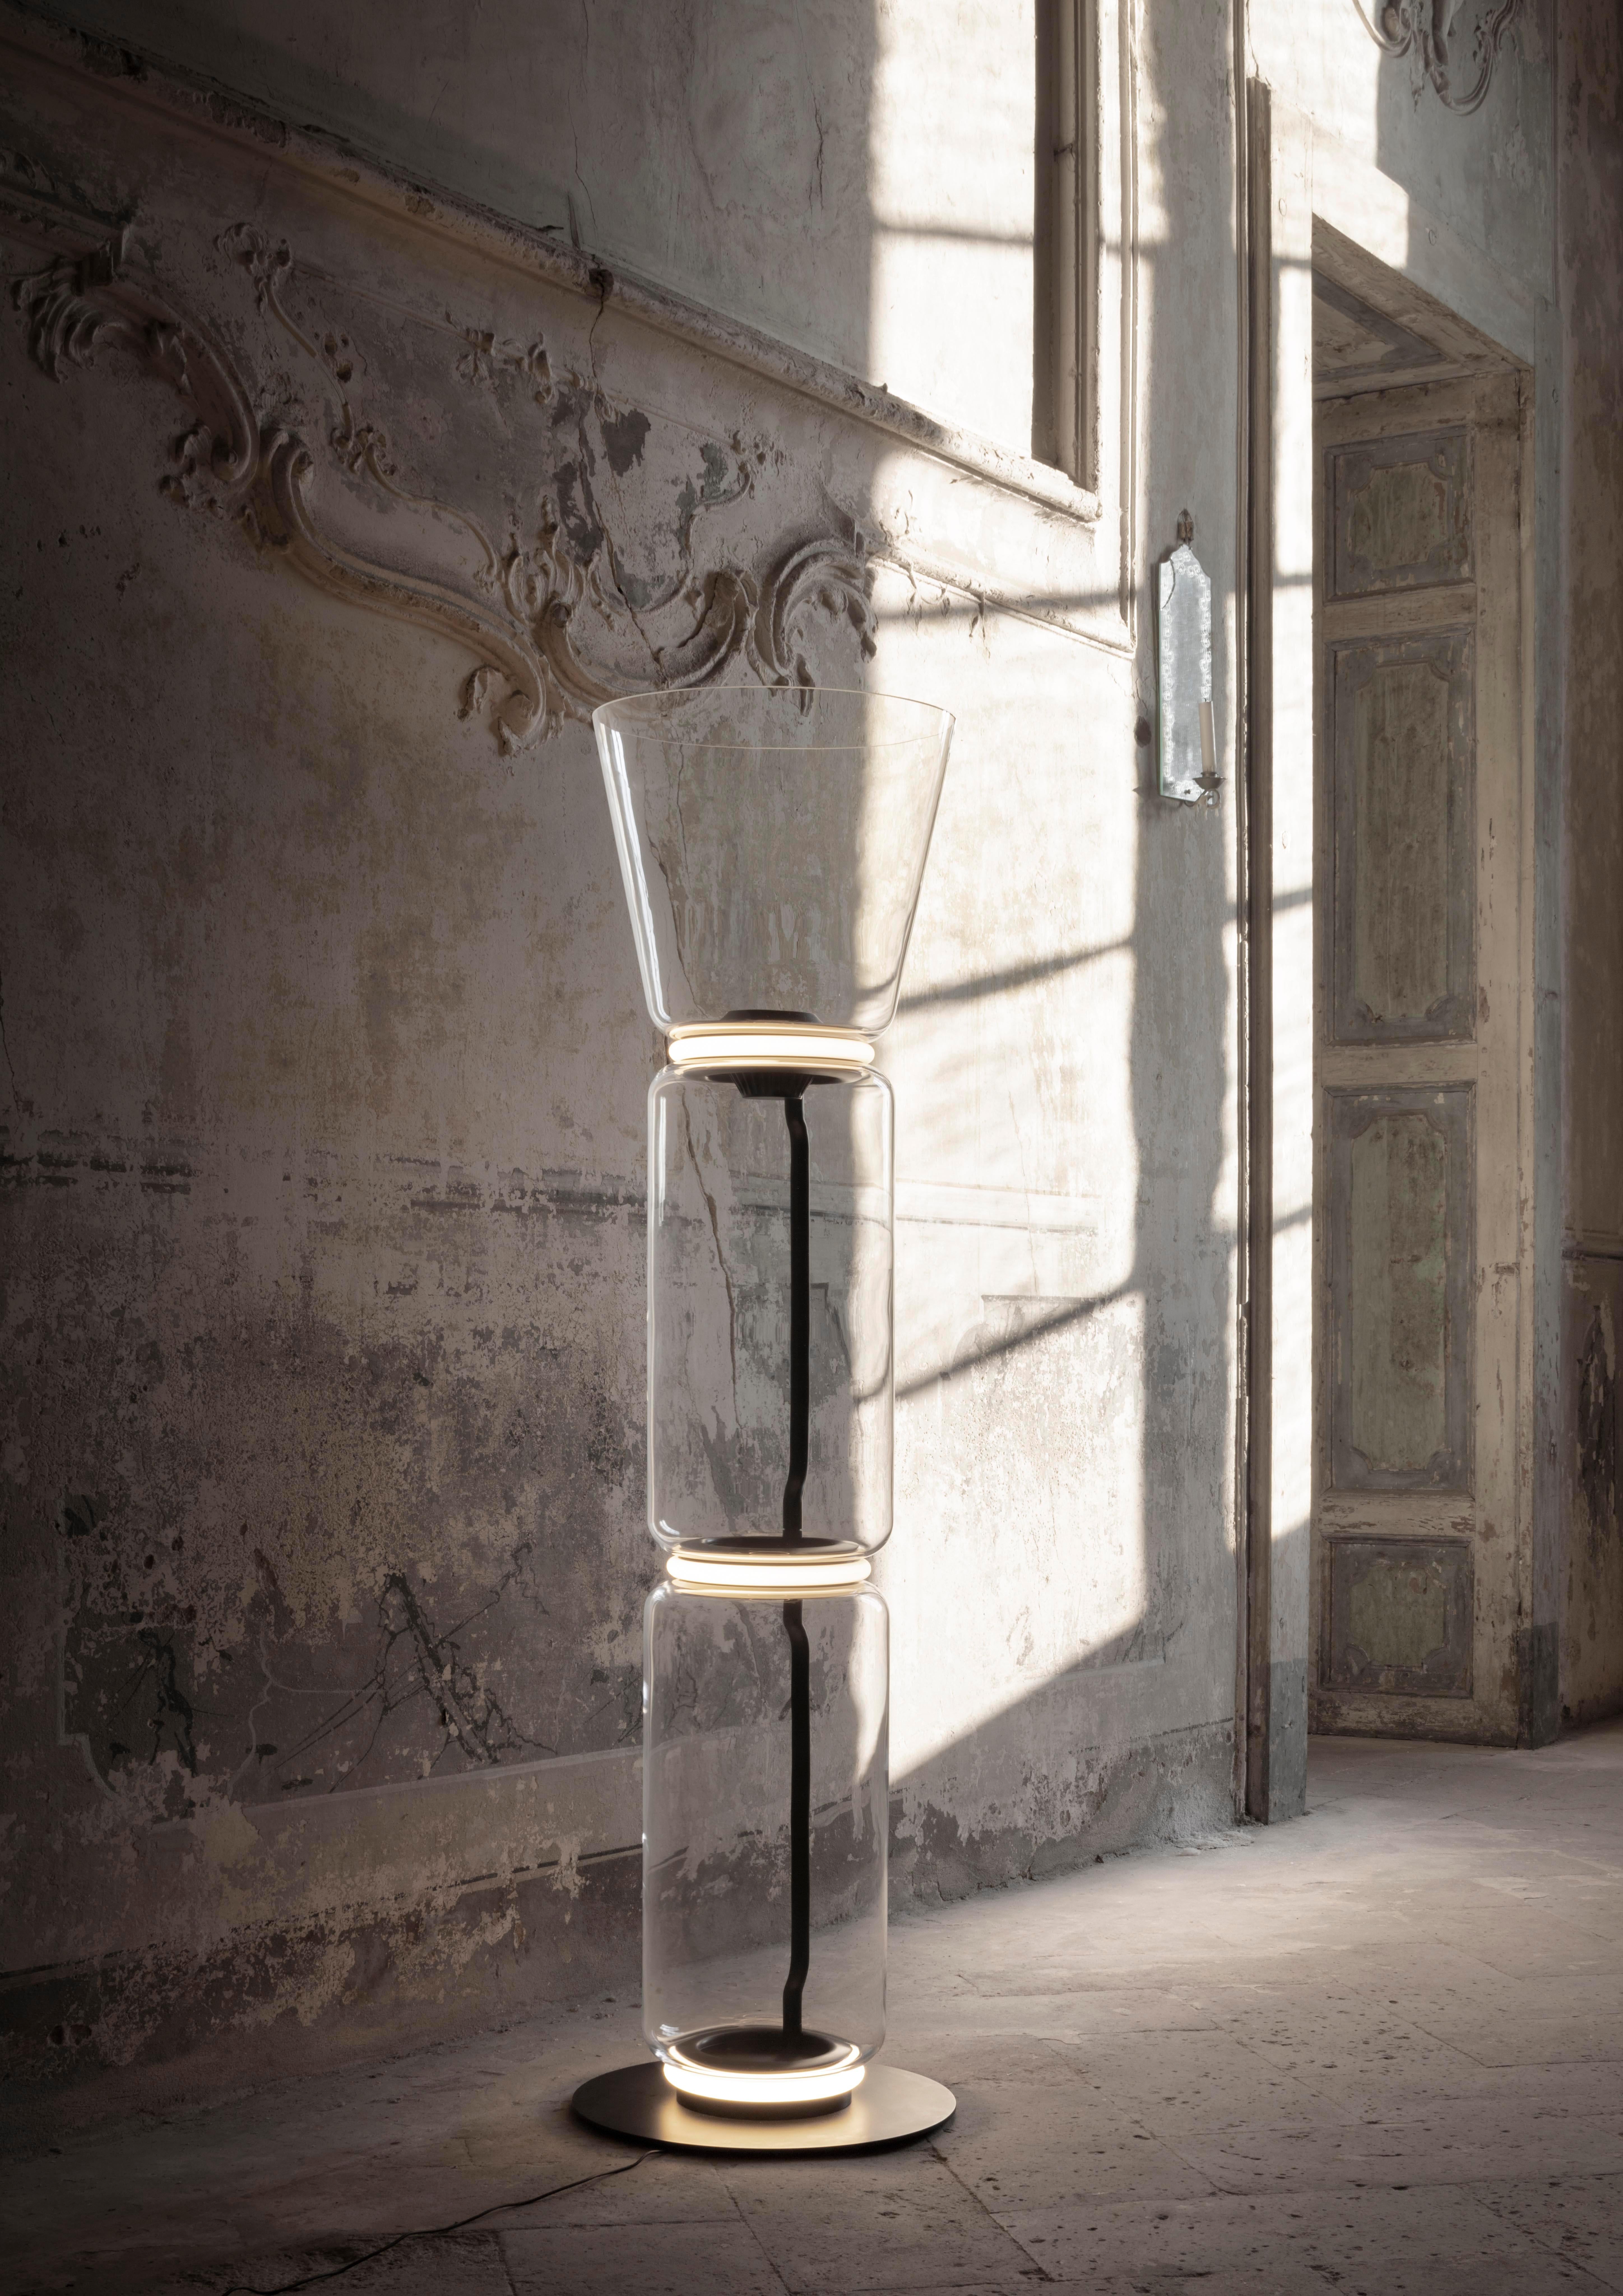 Here is a sneak peek into Noctambule, a modern-day lighting fixture designed by Konstantin Grcic for FLOS.

Powered by LED technology:
Dimmable lamp (controls provided in the power supply unit or power cord)
Cylindrical body (transparent hand blown